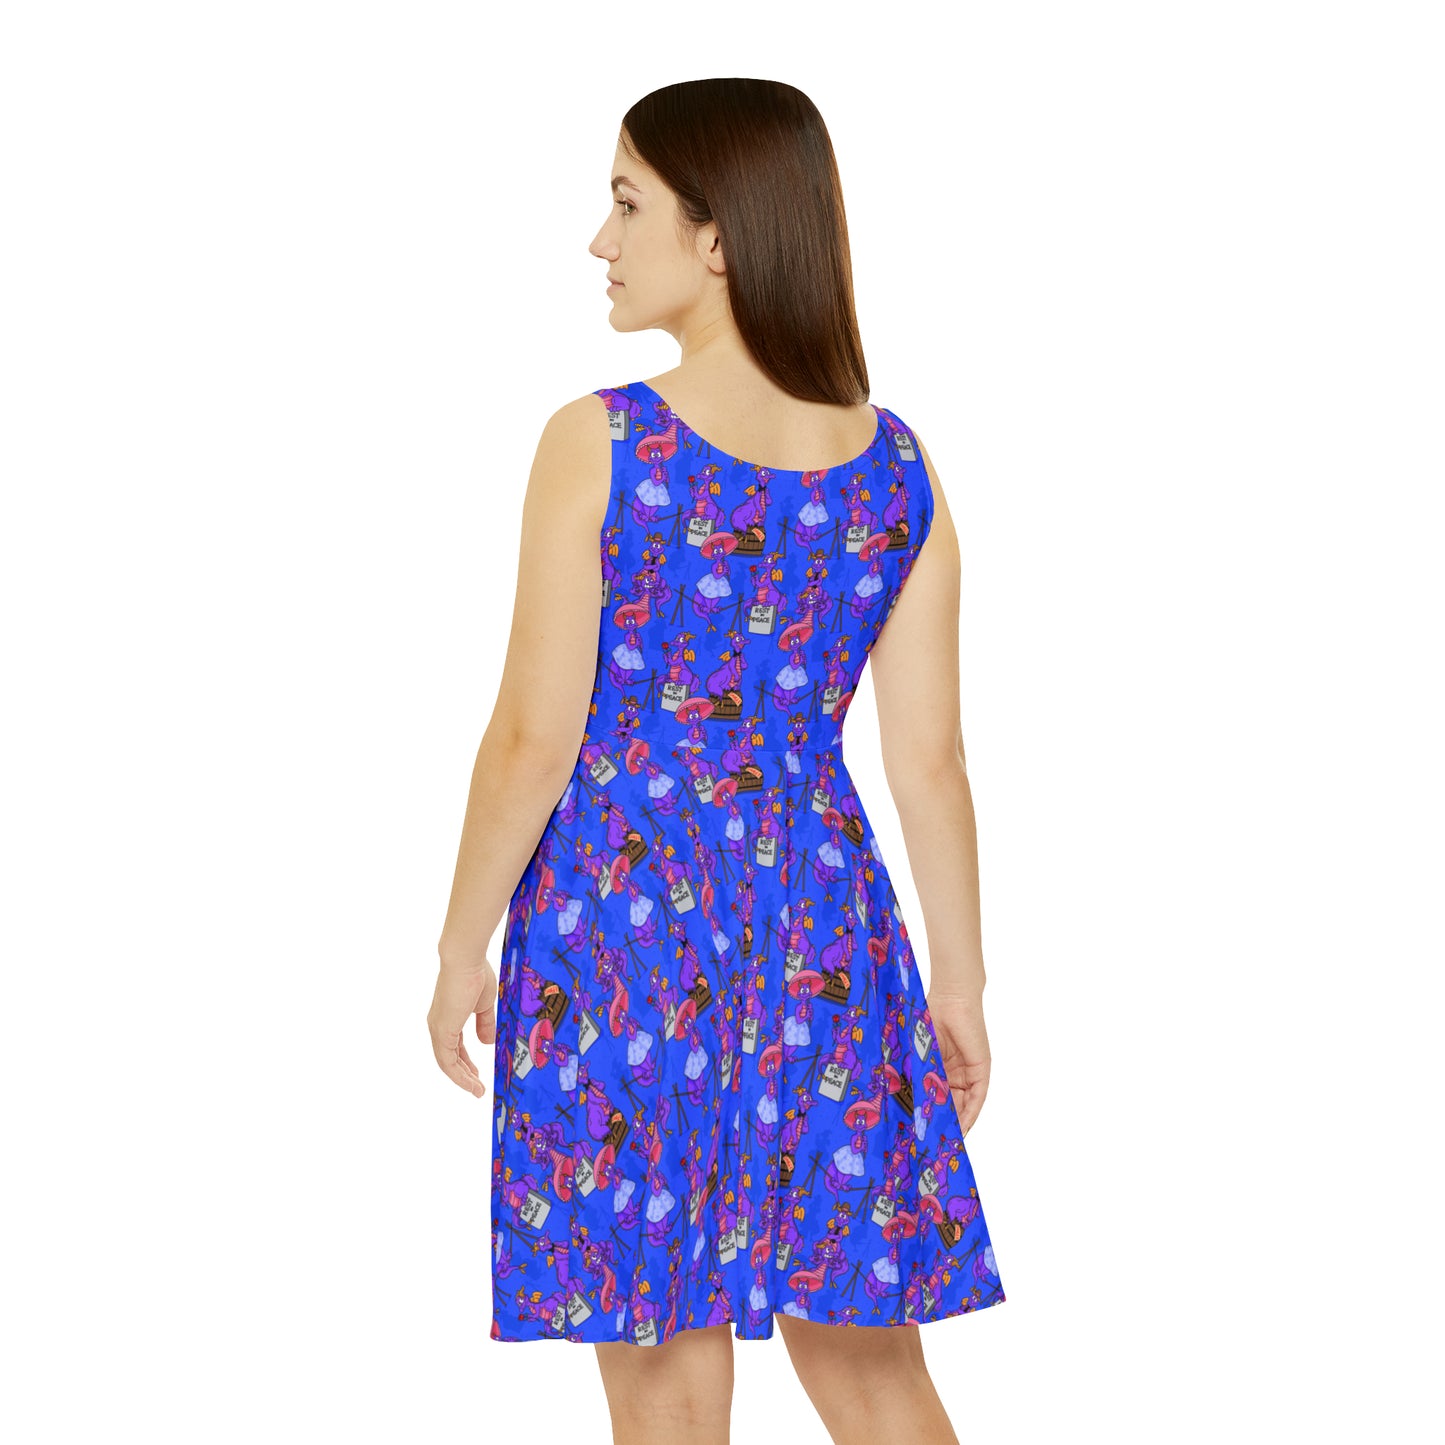 Haunted Mansion Figment Women's Skater Dress